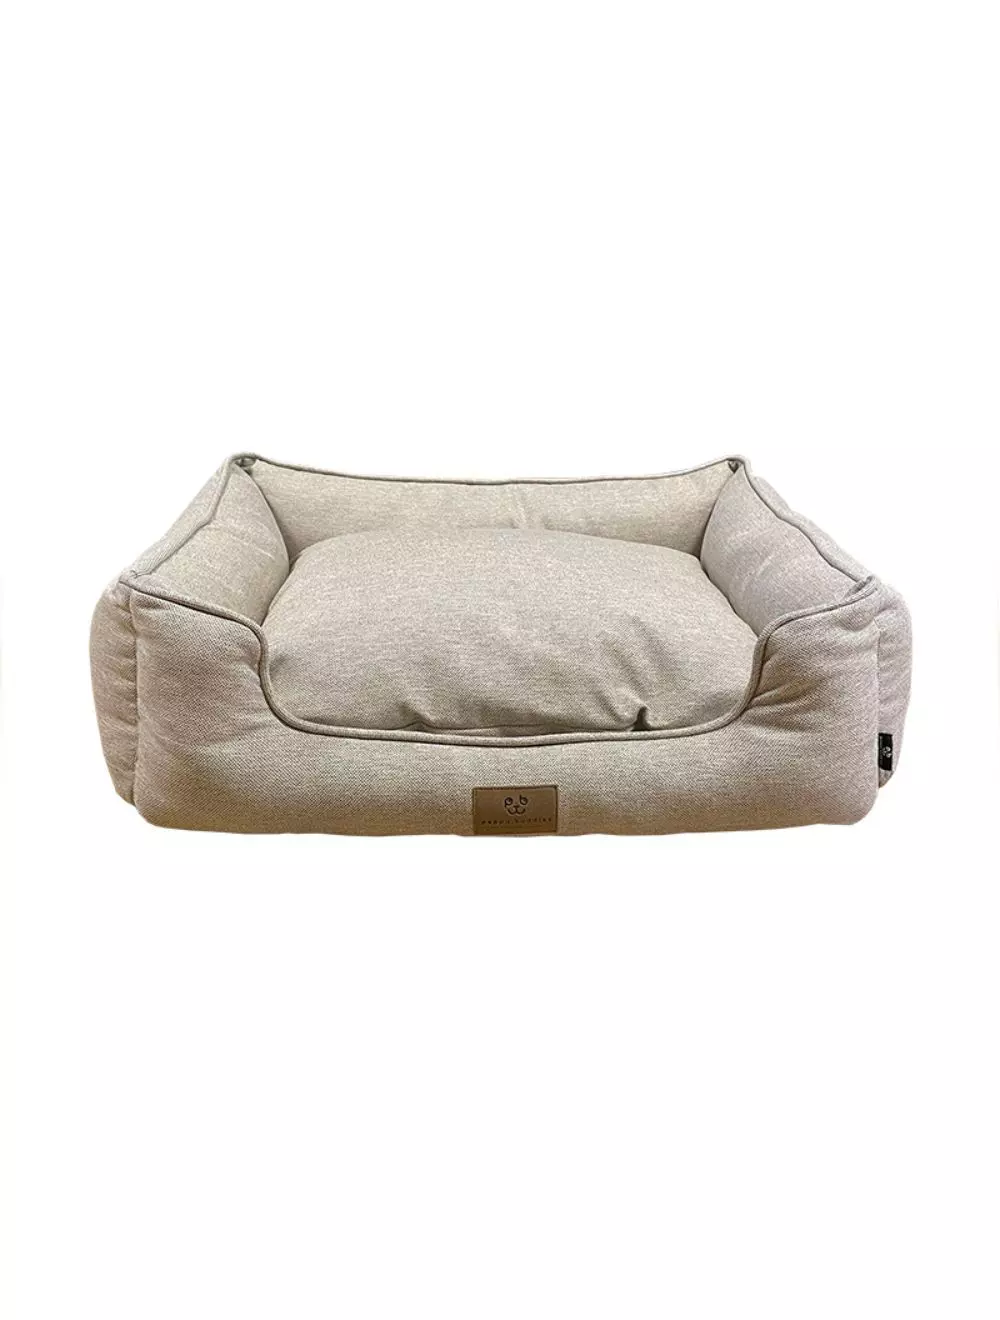 Peppy Buddies Dogbed Trendy, Transcend Large